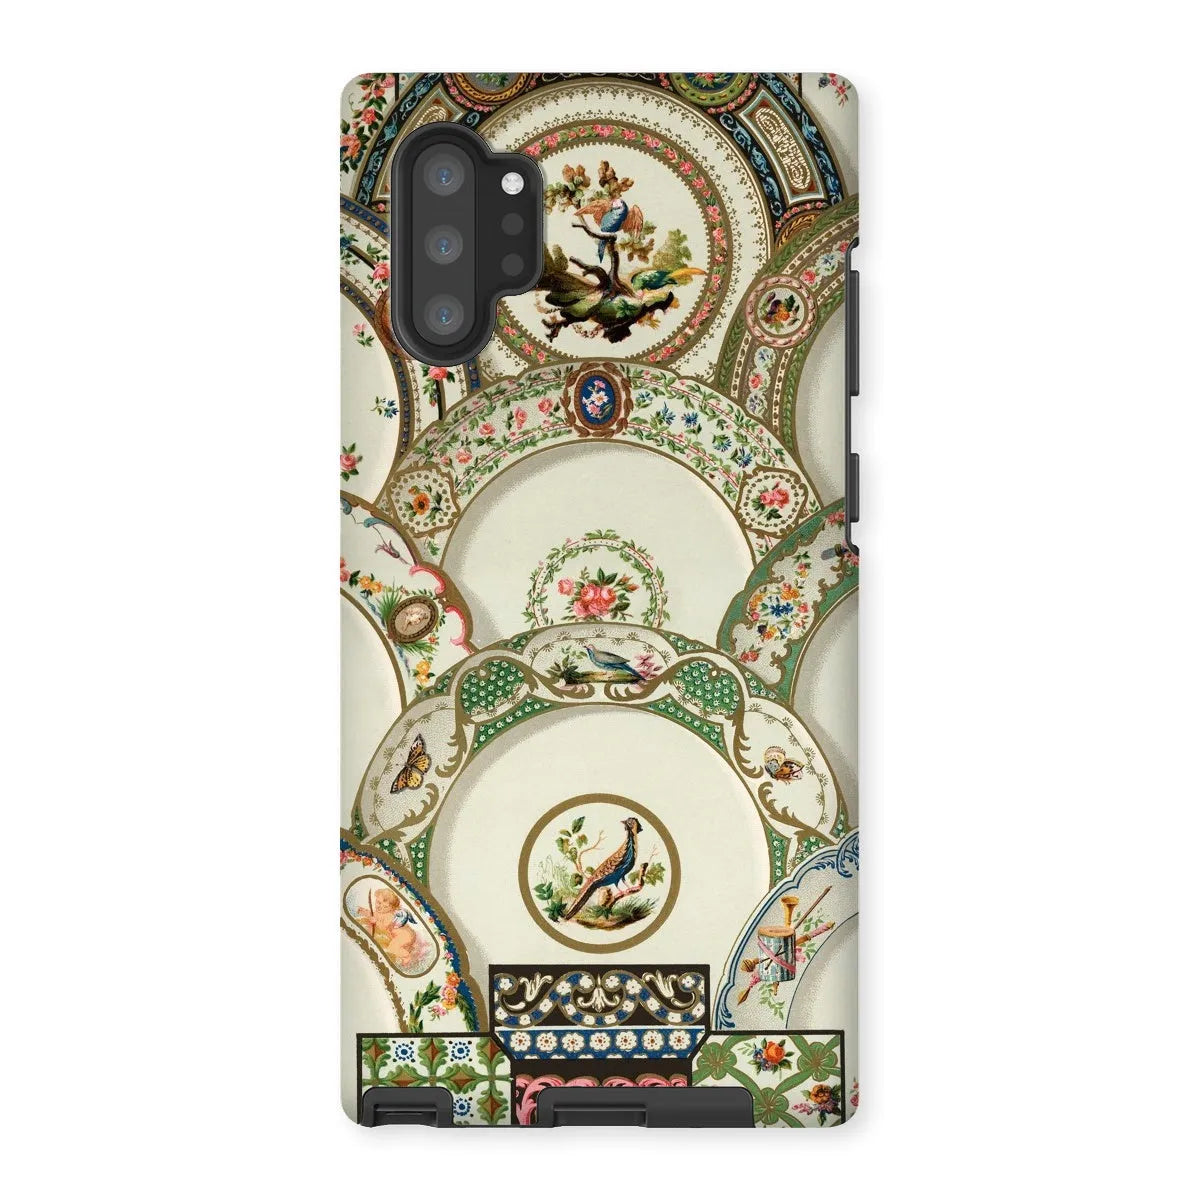 Decorative Plates By Auguste Racinet Tough Phone Case - Samsung Galaxy Note 10p / Matte - Mobile Phone Cases